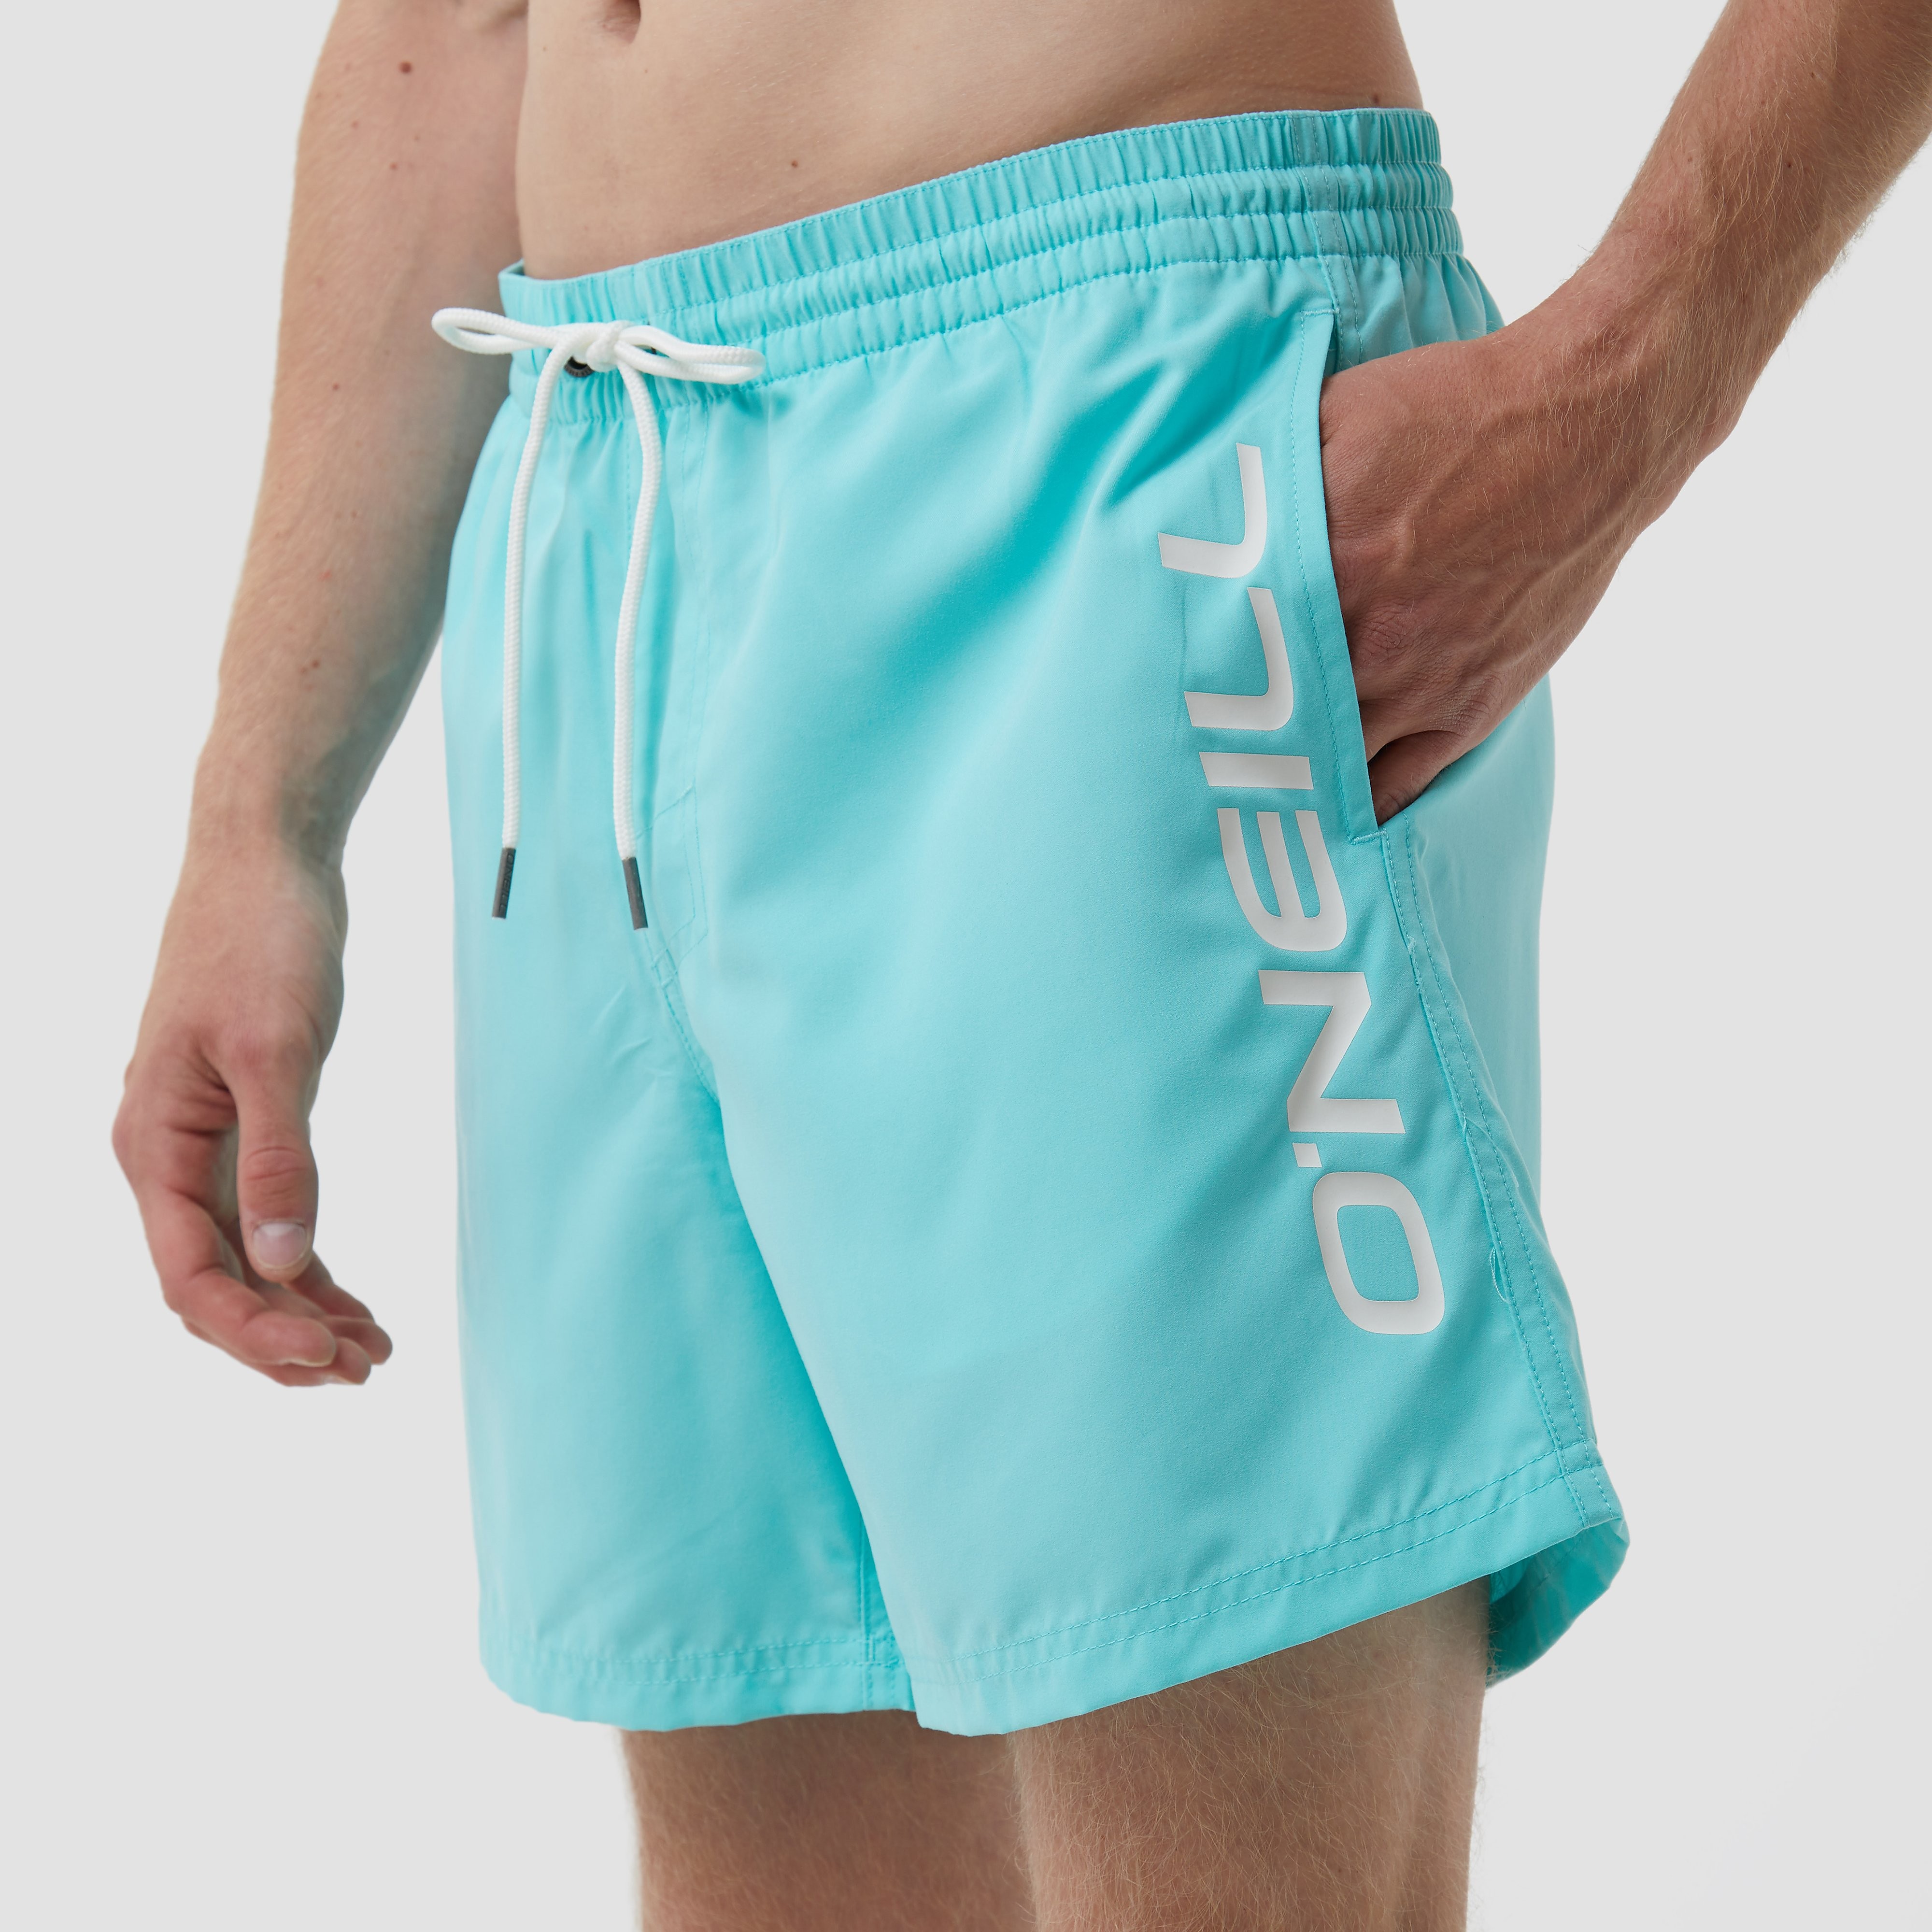 O'Neill Zwembroek Men Cali Aqua Spalsh M - Aqua Spalsh 50% Gerecycled Polyester (Repreve), 50% Polyester Null